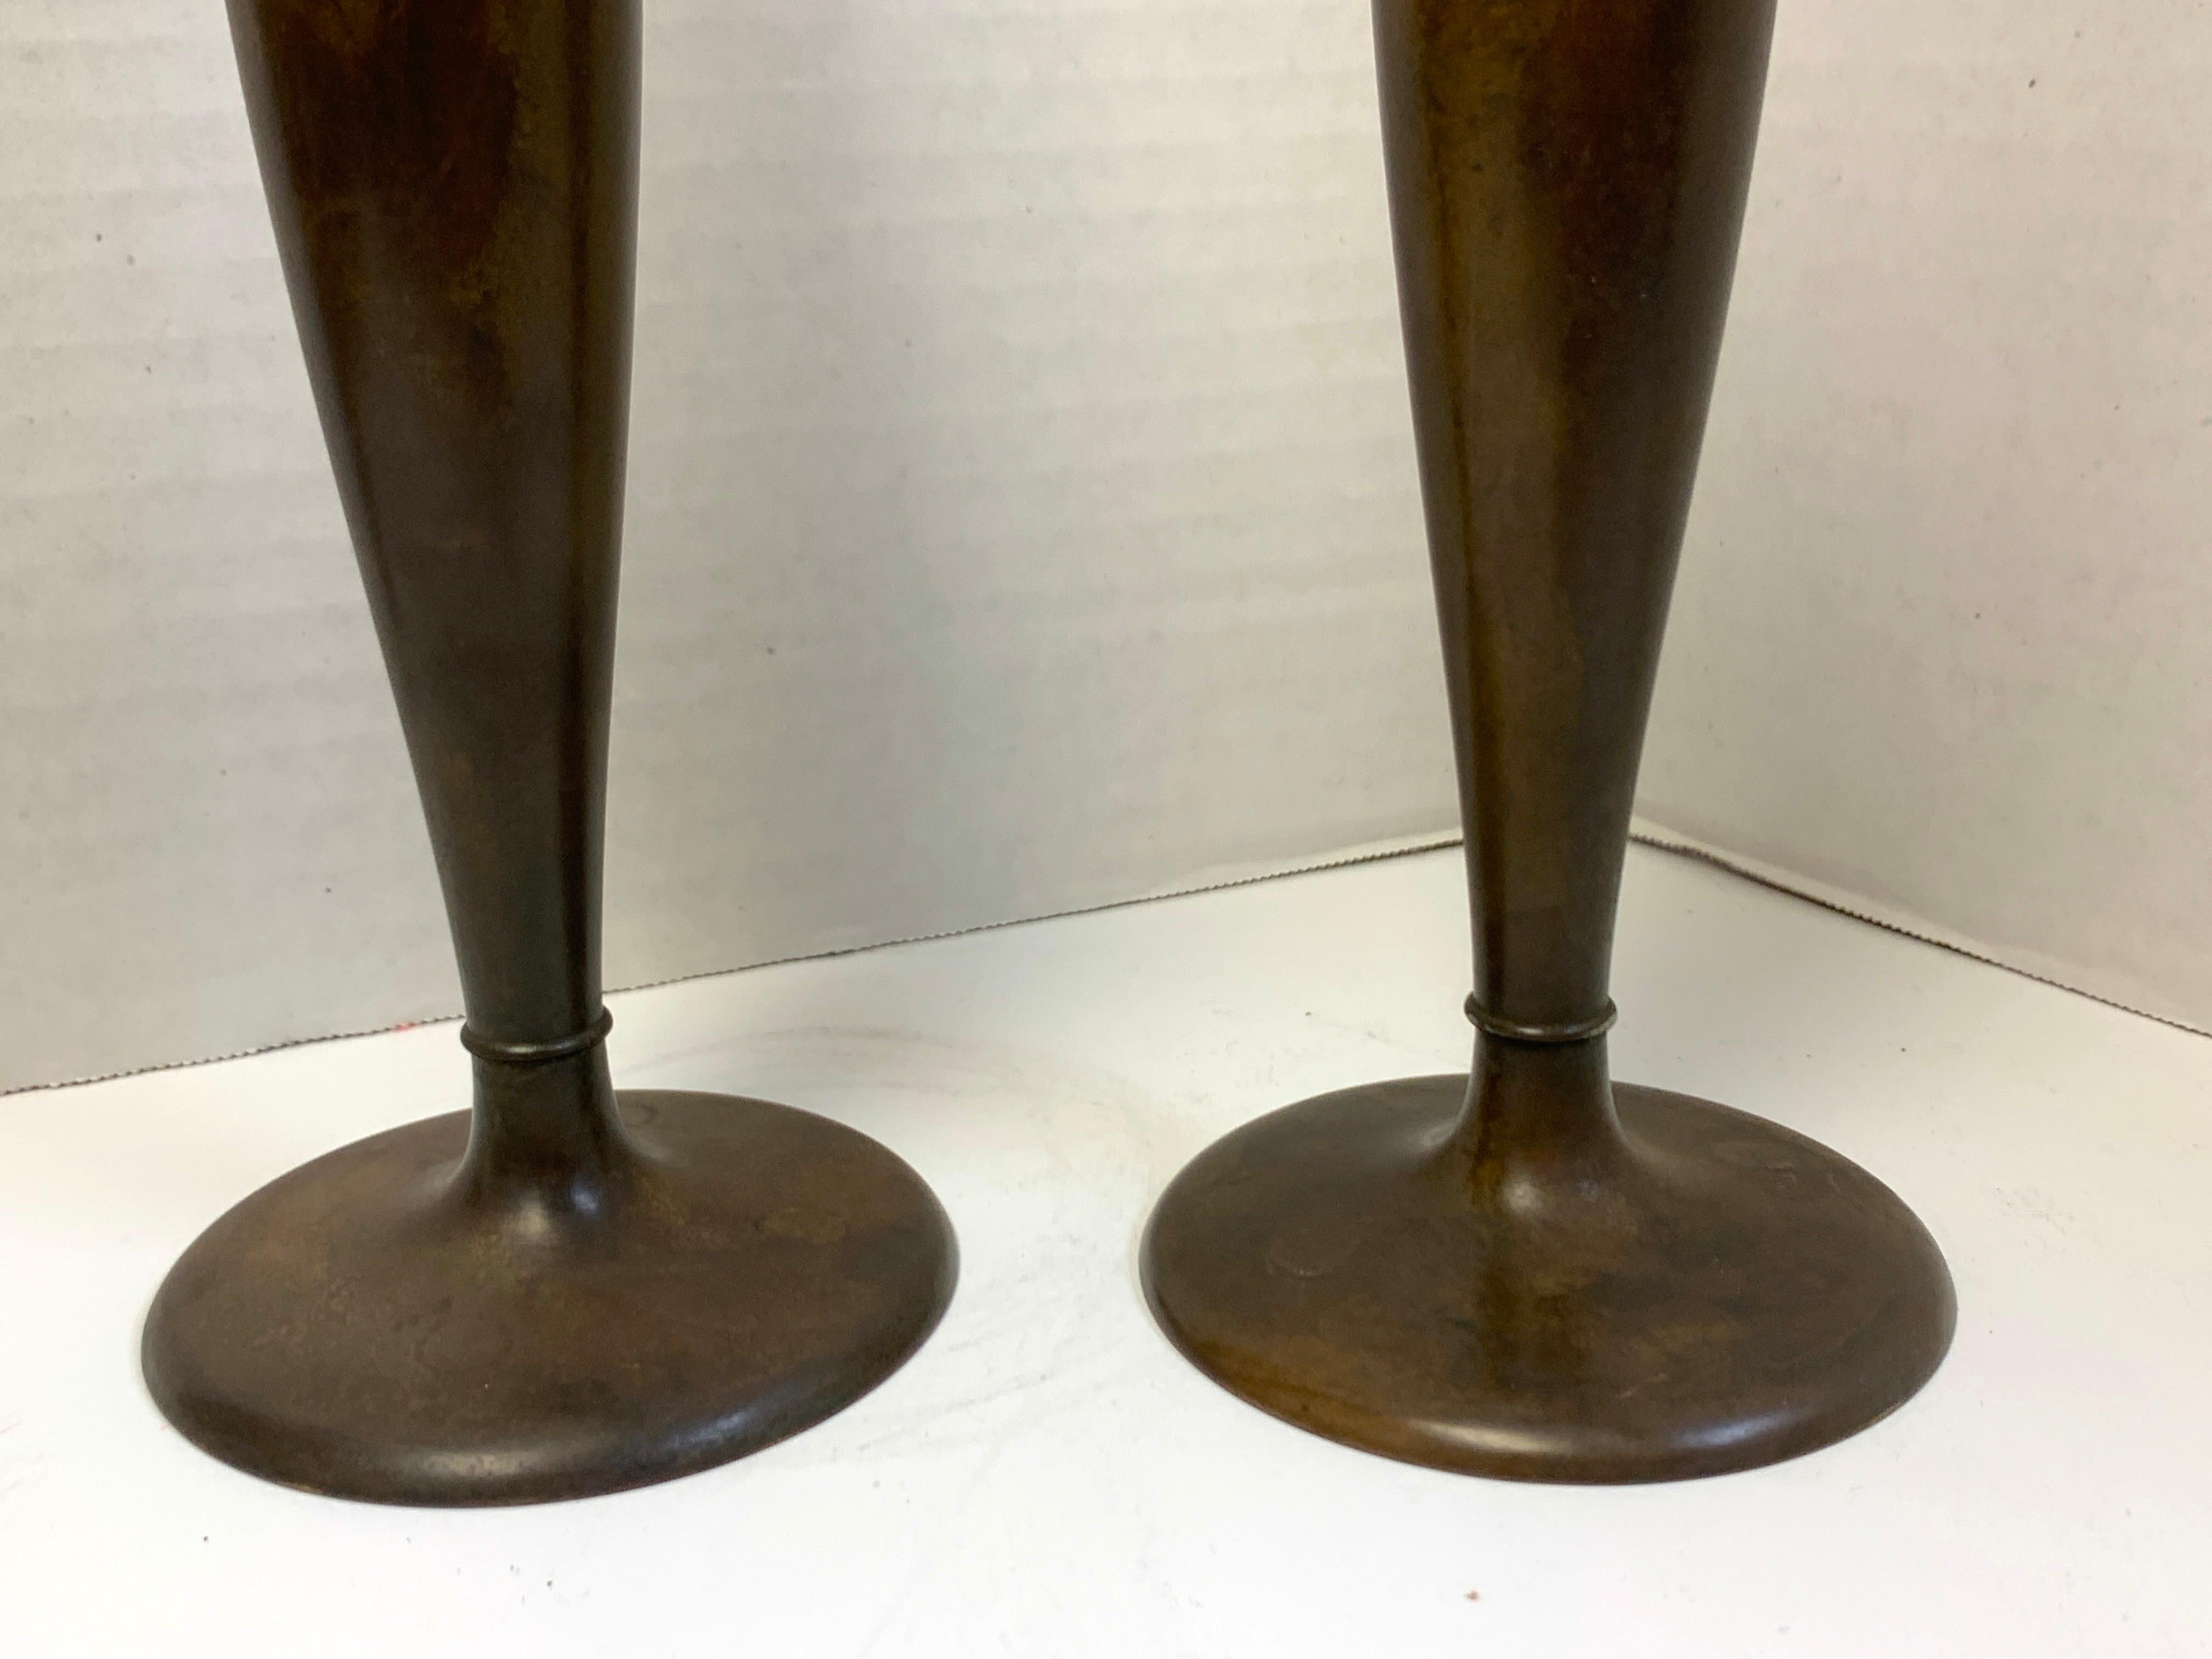 Modern Pair of Tapered Bronze Vases, by Tiffany Studios, New York 